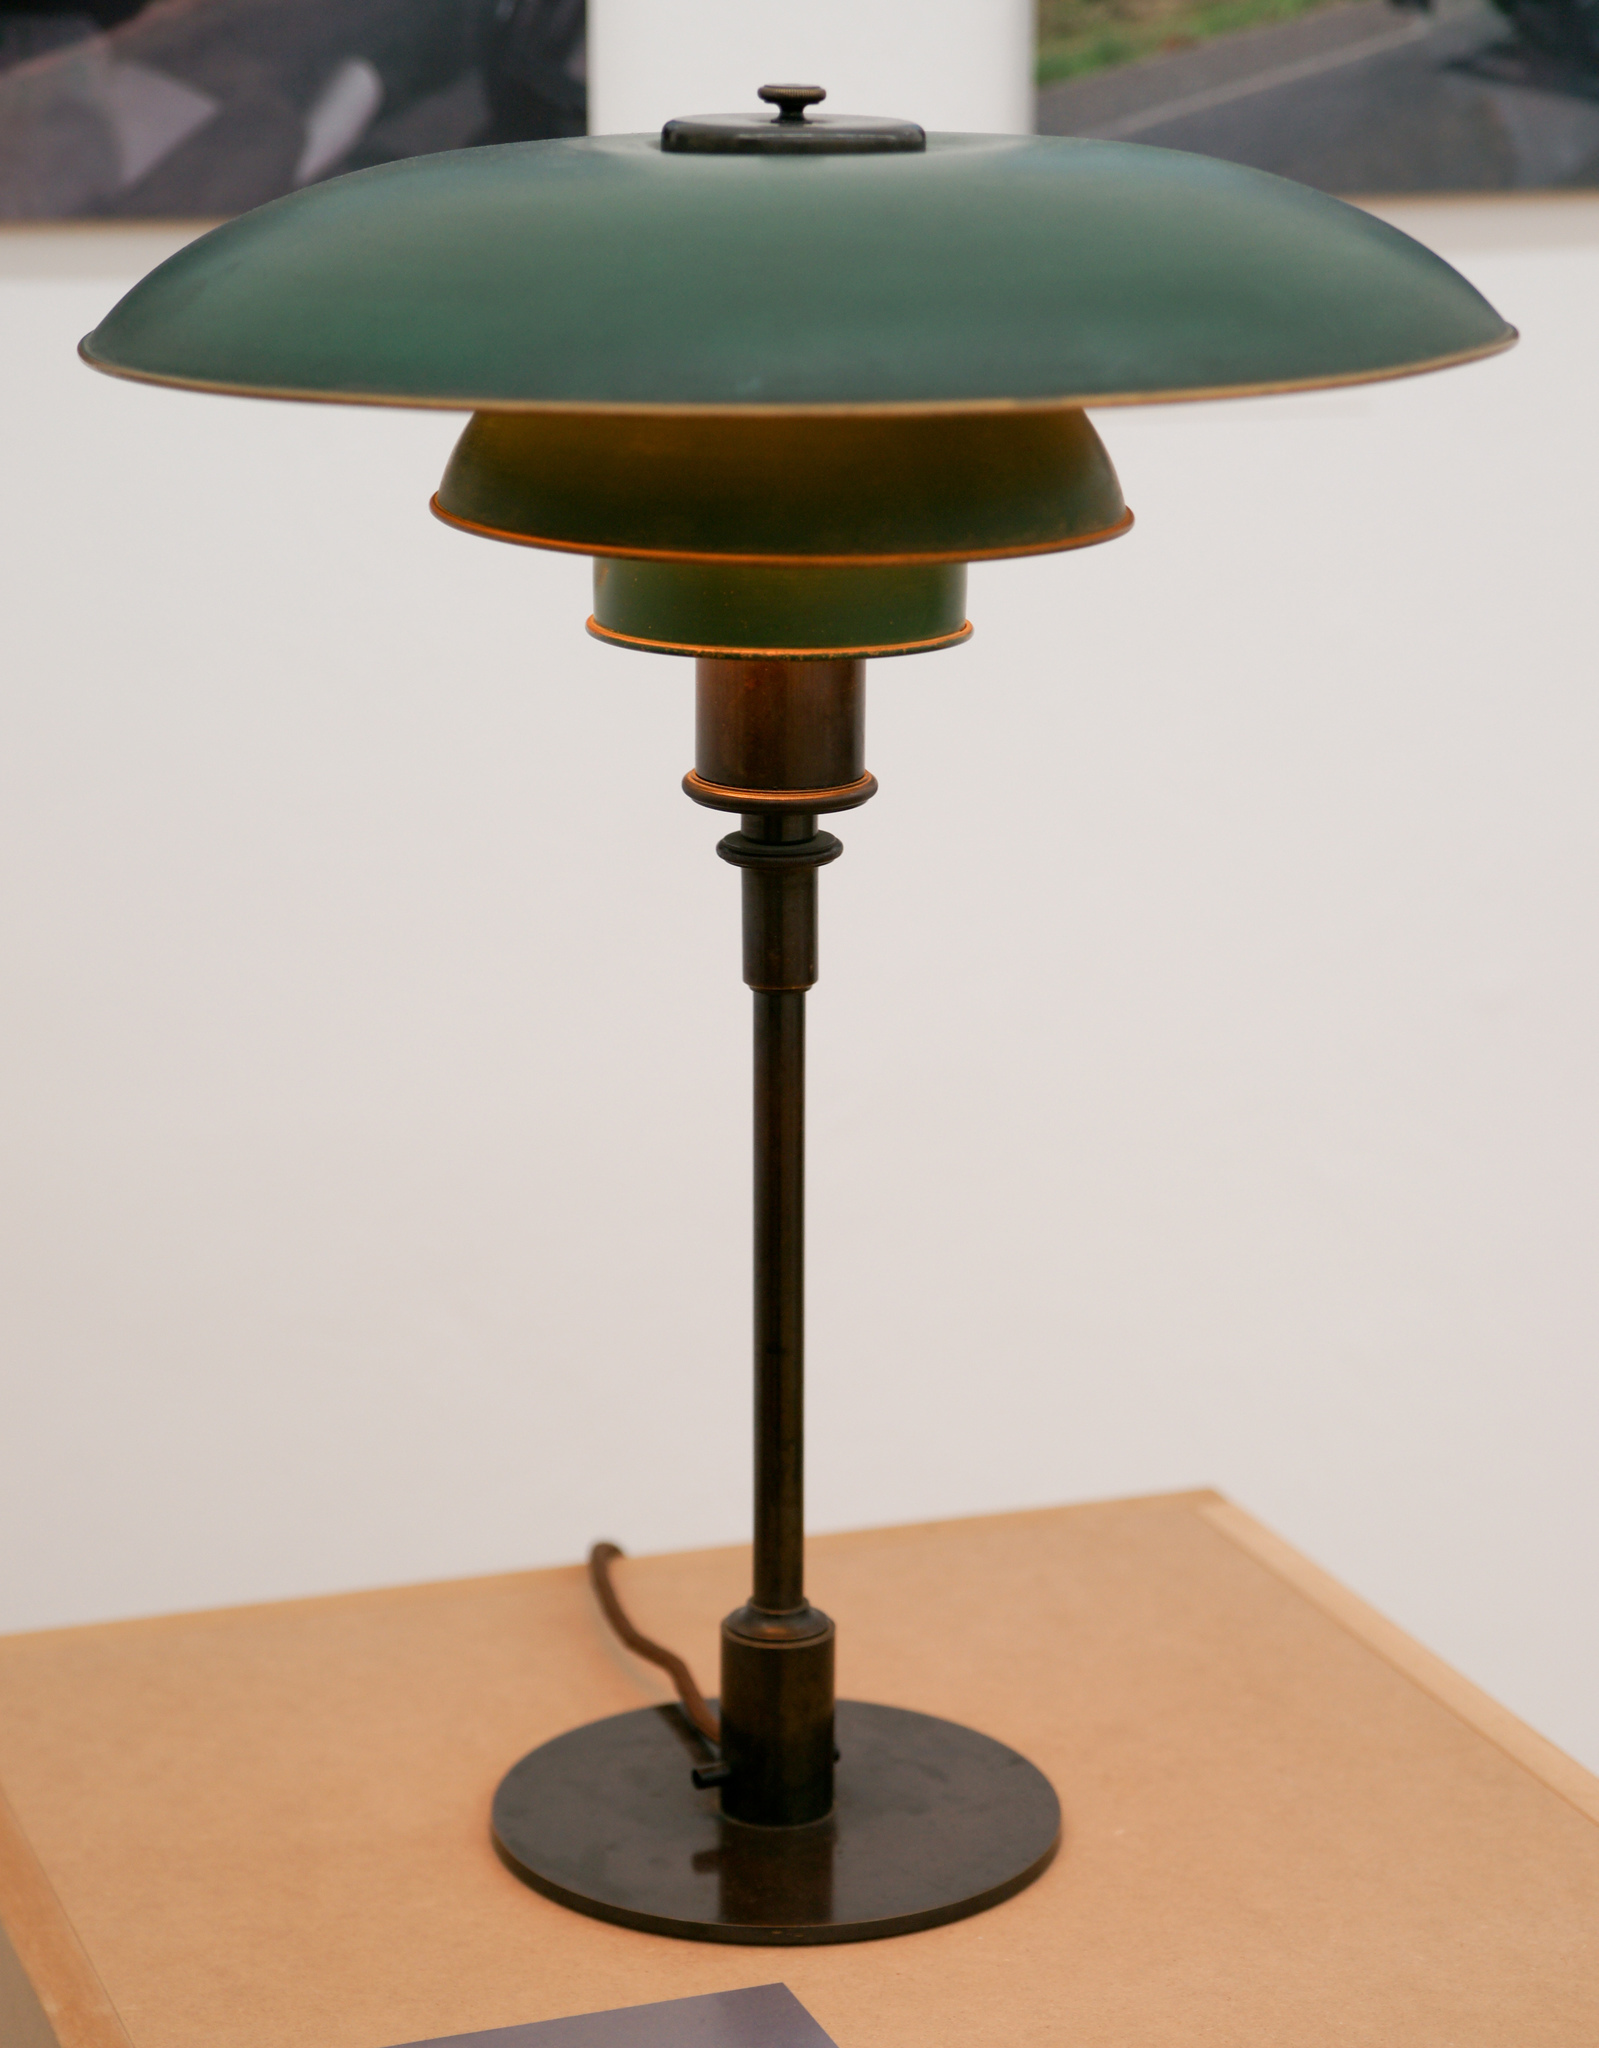 replica Louis table lamp by Poul Henningsen